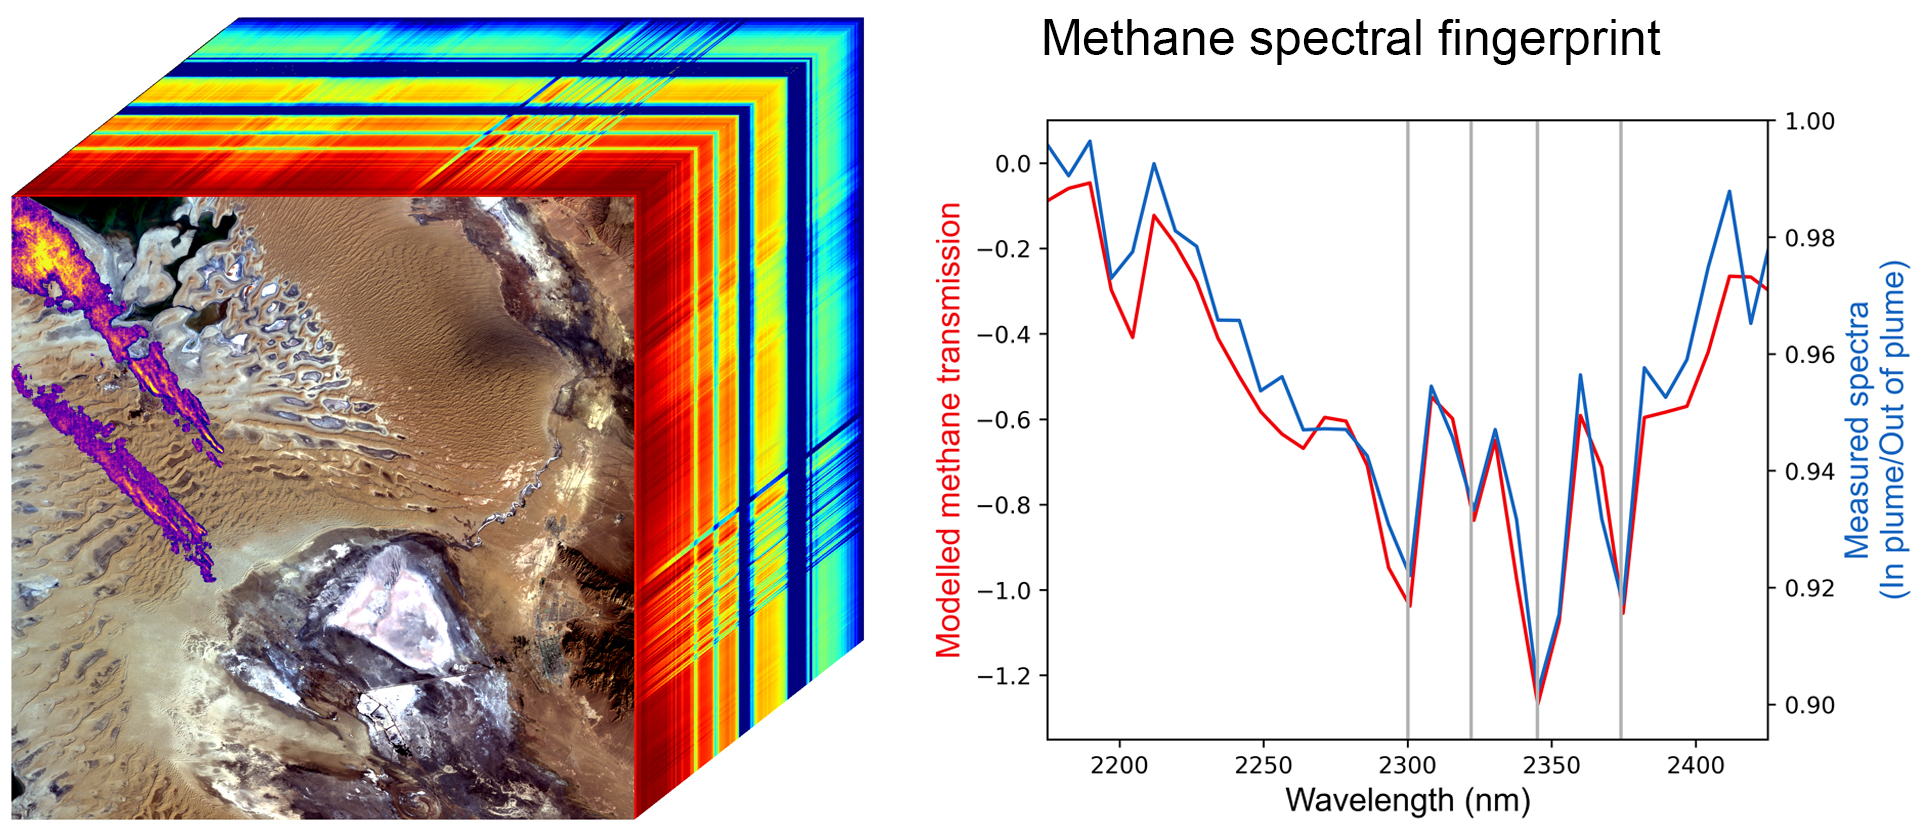 The cube (left) shows methane plumes (purple, orange, yellow) over Turkmenistan. The blue line in the graph (right) shows the methane fingerprint EMIT detected; the red line is the expected fingerprint based on an atmospheric simulation.